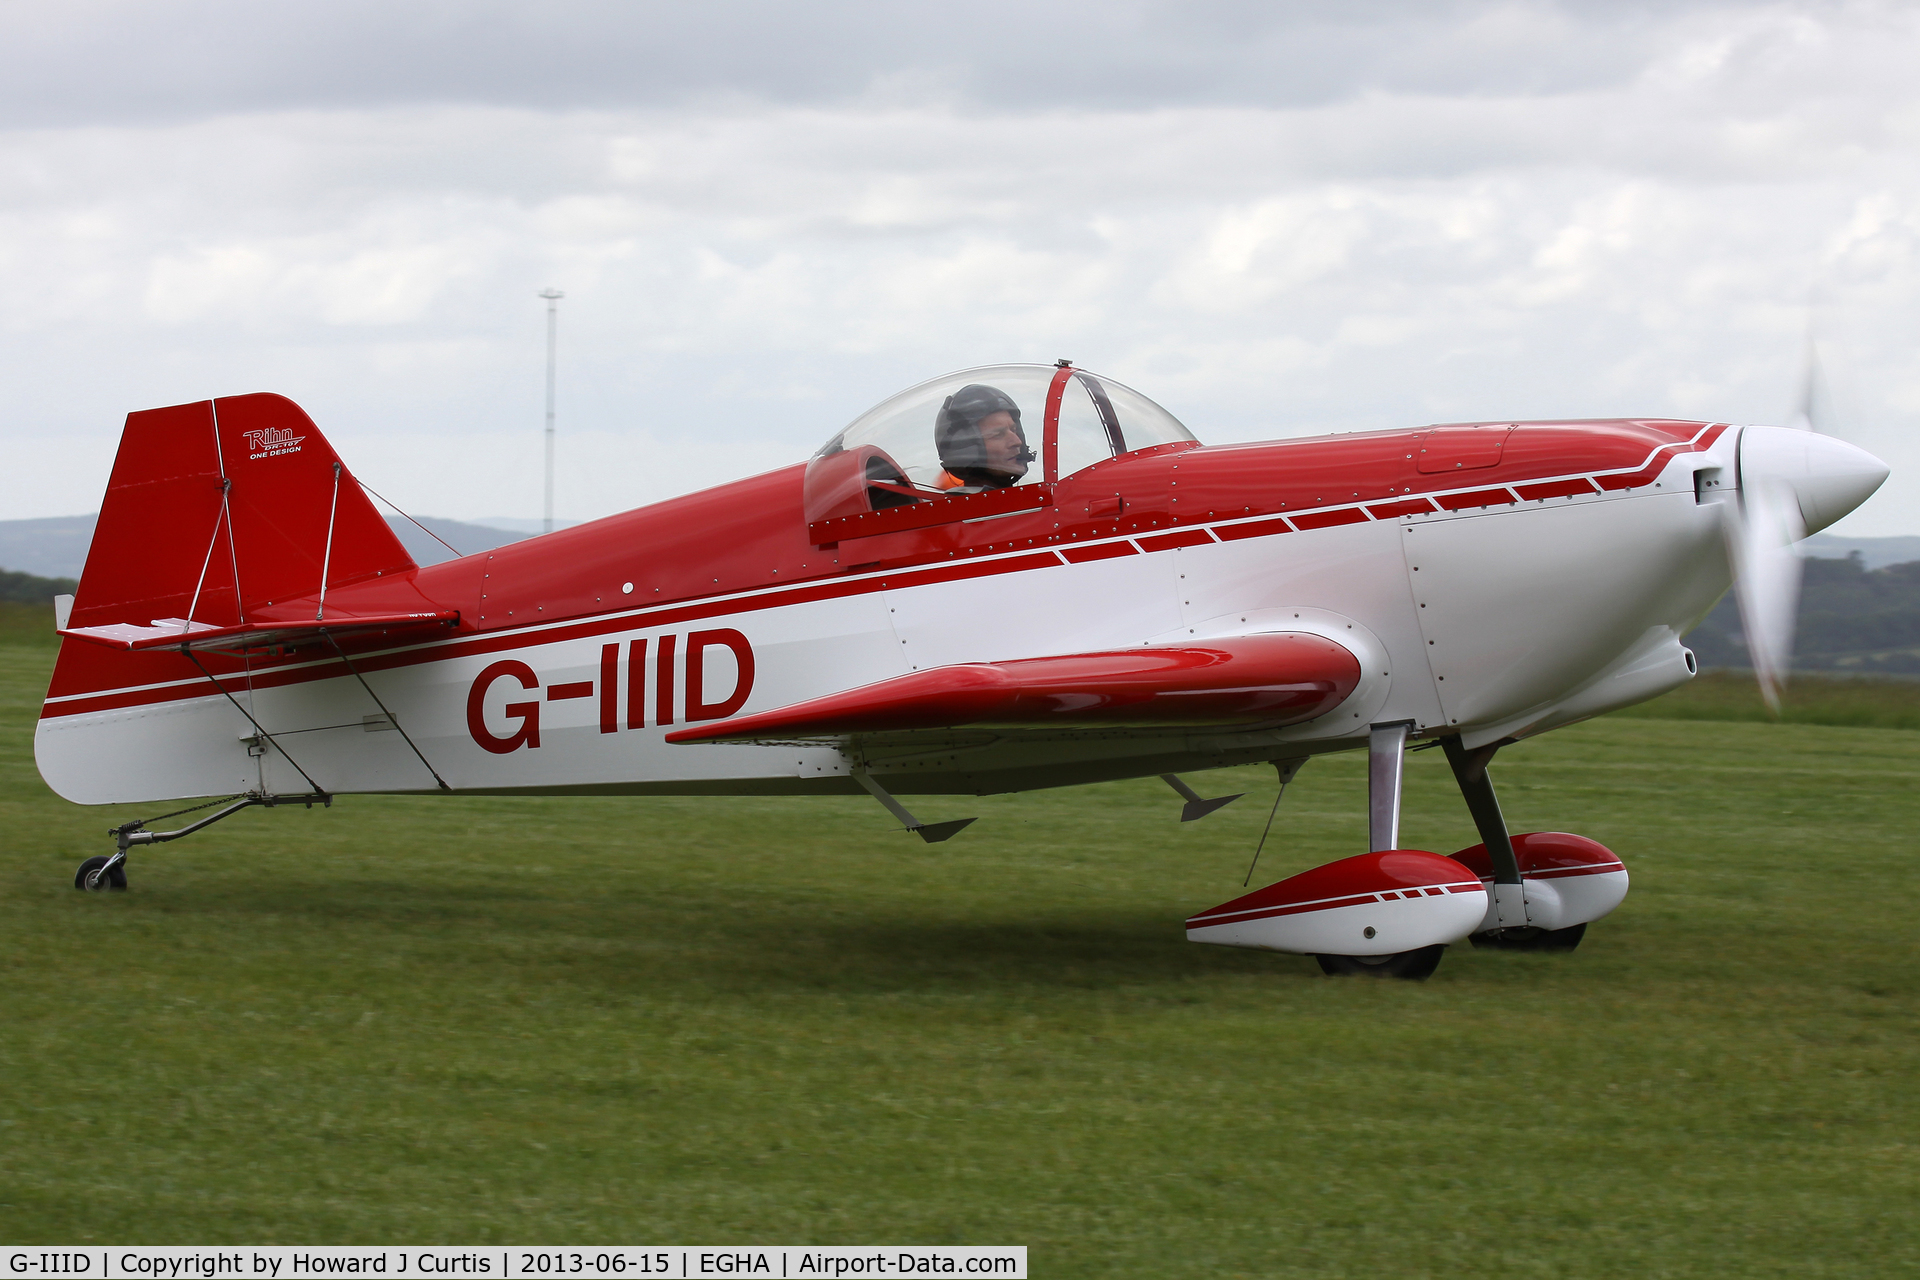 G-IIID, 2005 Rihn DR-107 One Design C/N PFA 264-12766, Privately owned, at the aerobatic competition here.